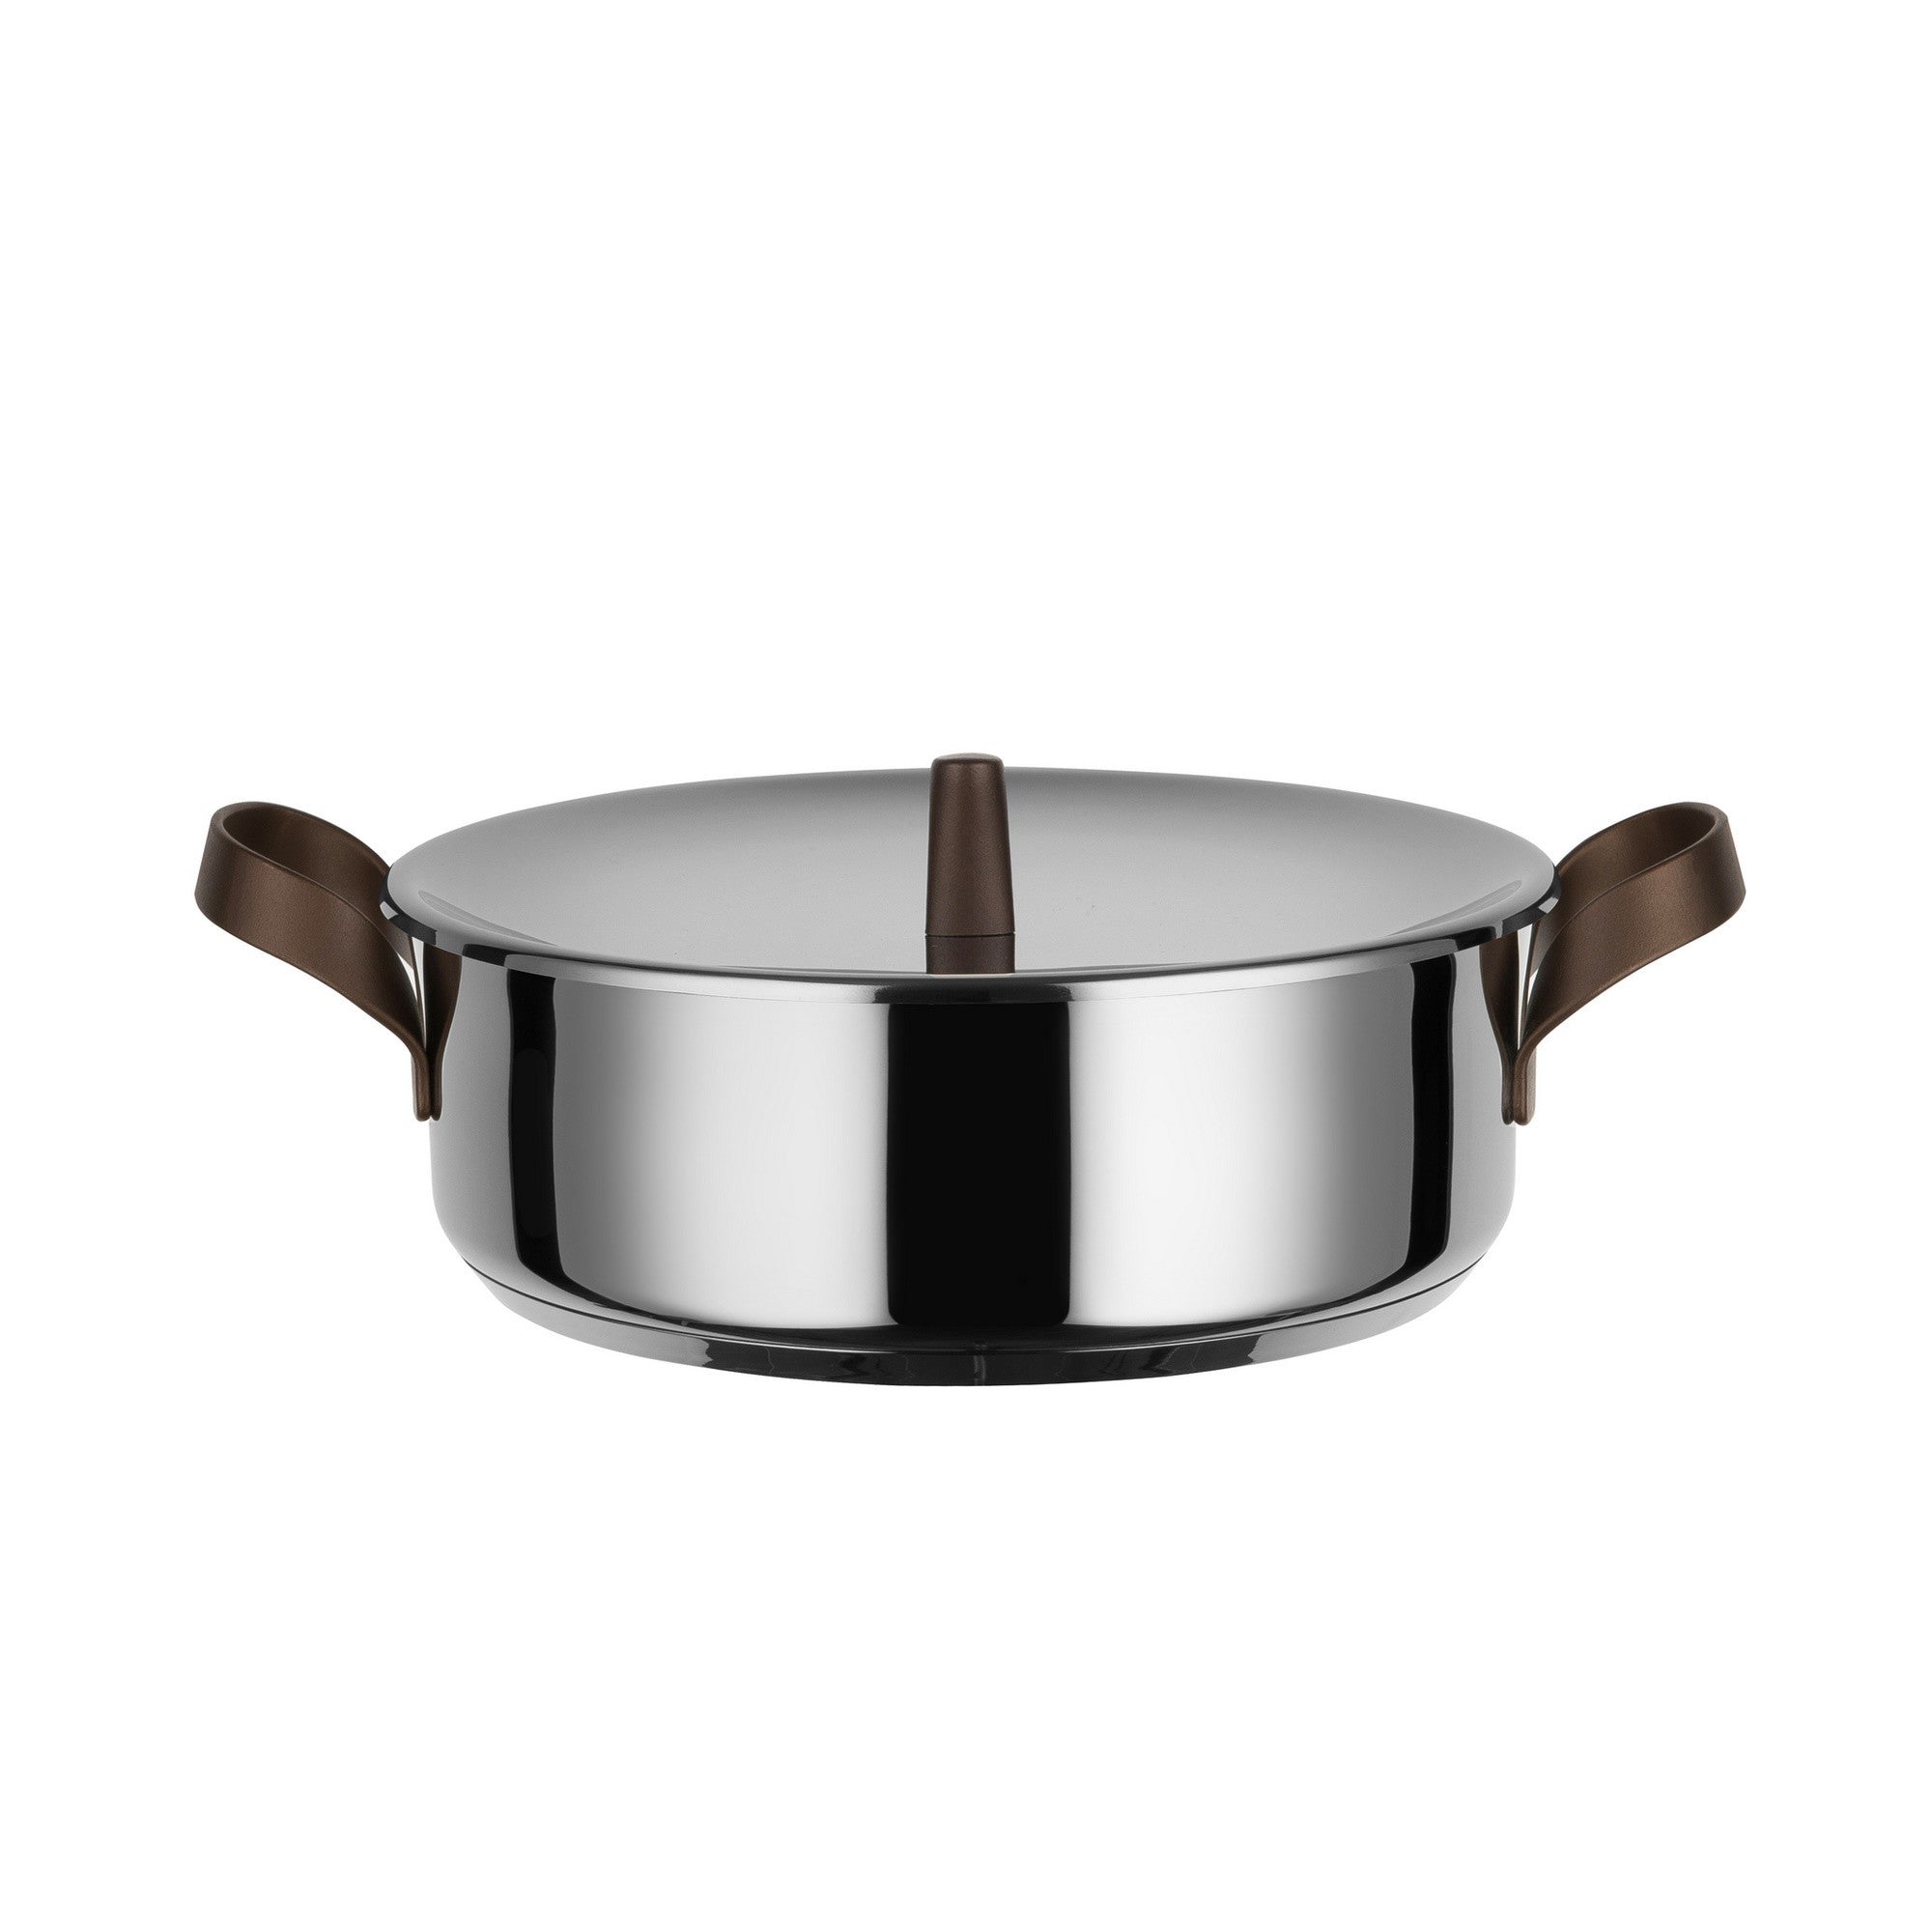 Alessi Edo Casserole with Two Handles in Stainless Steel, cm 28